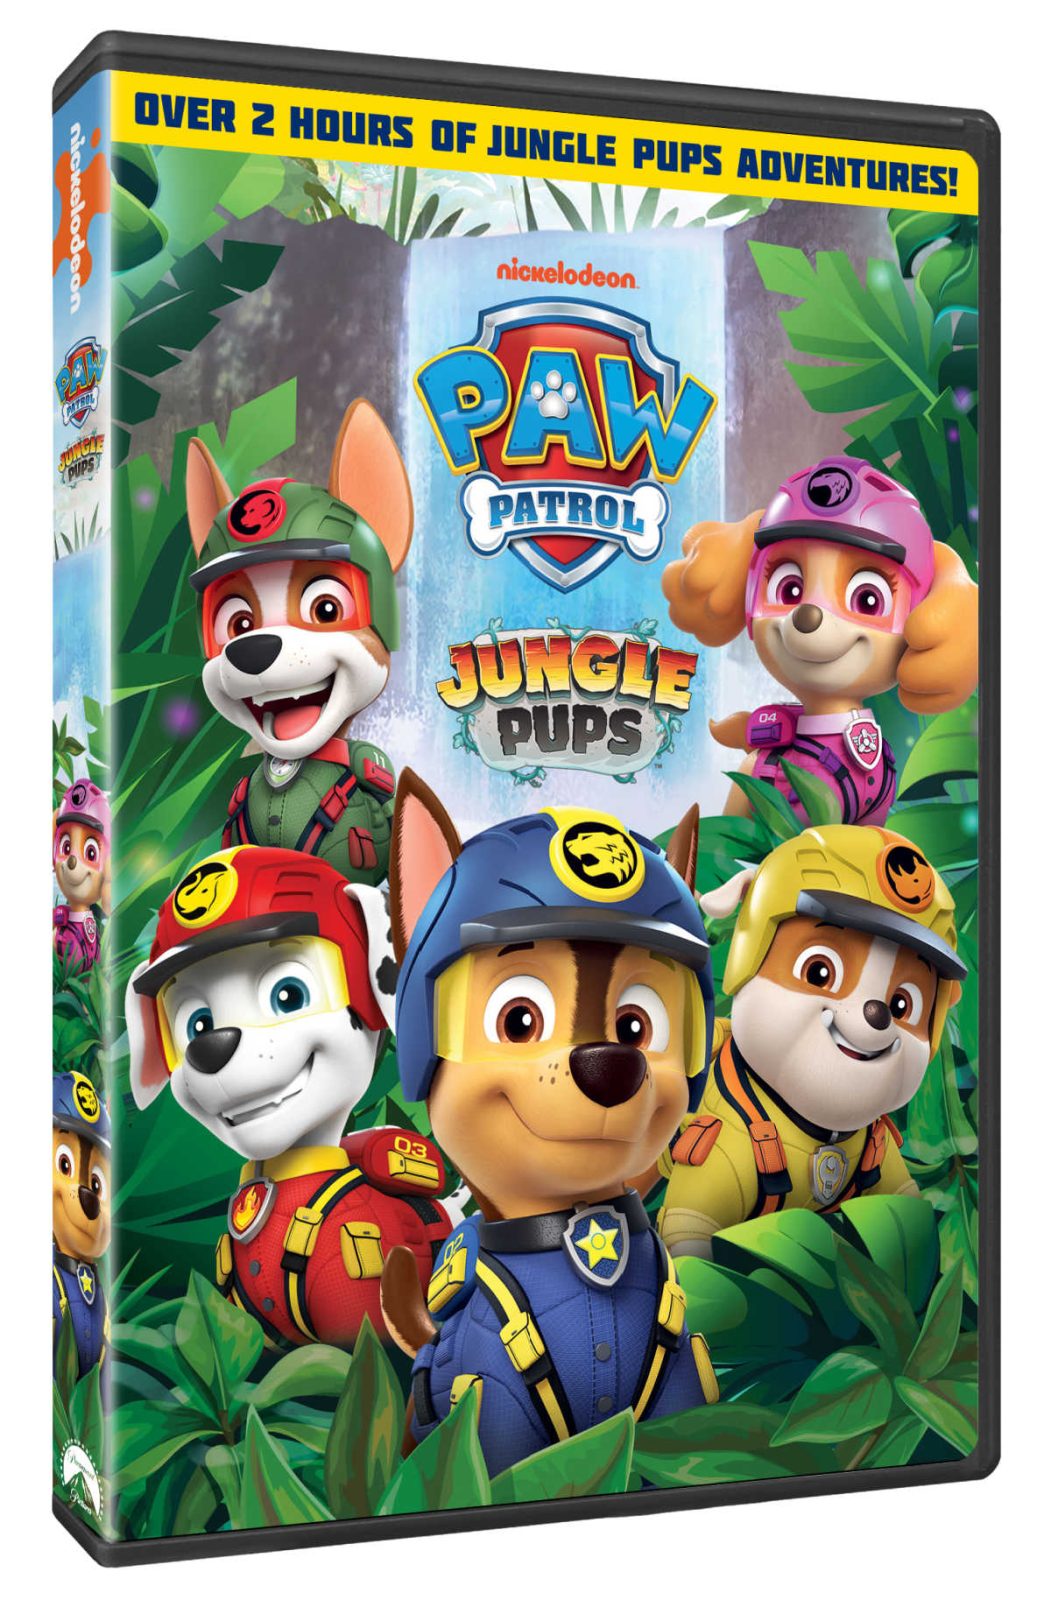 Get ready for an exciting adventure with PAW Patrol Jungle Pups! The new DVD features the pups in fun animal-themed vehicles, rescuing exotic animals and facing thrilling challenges. Packed with action, humor, and adorable jungle creatures, this DVD is sure to be a hit with kids! 